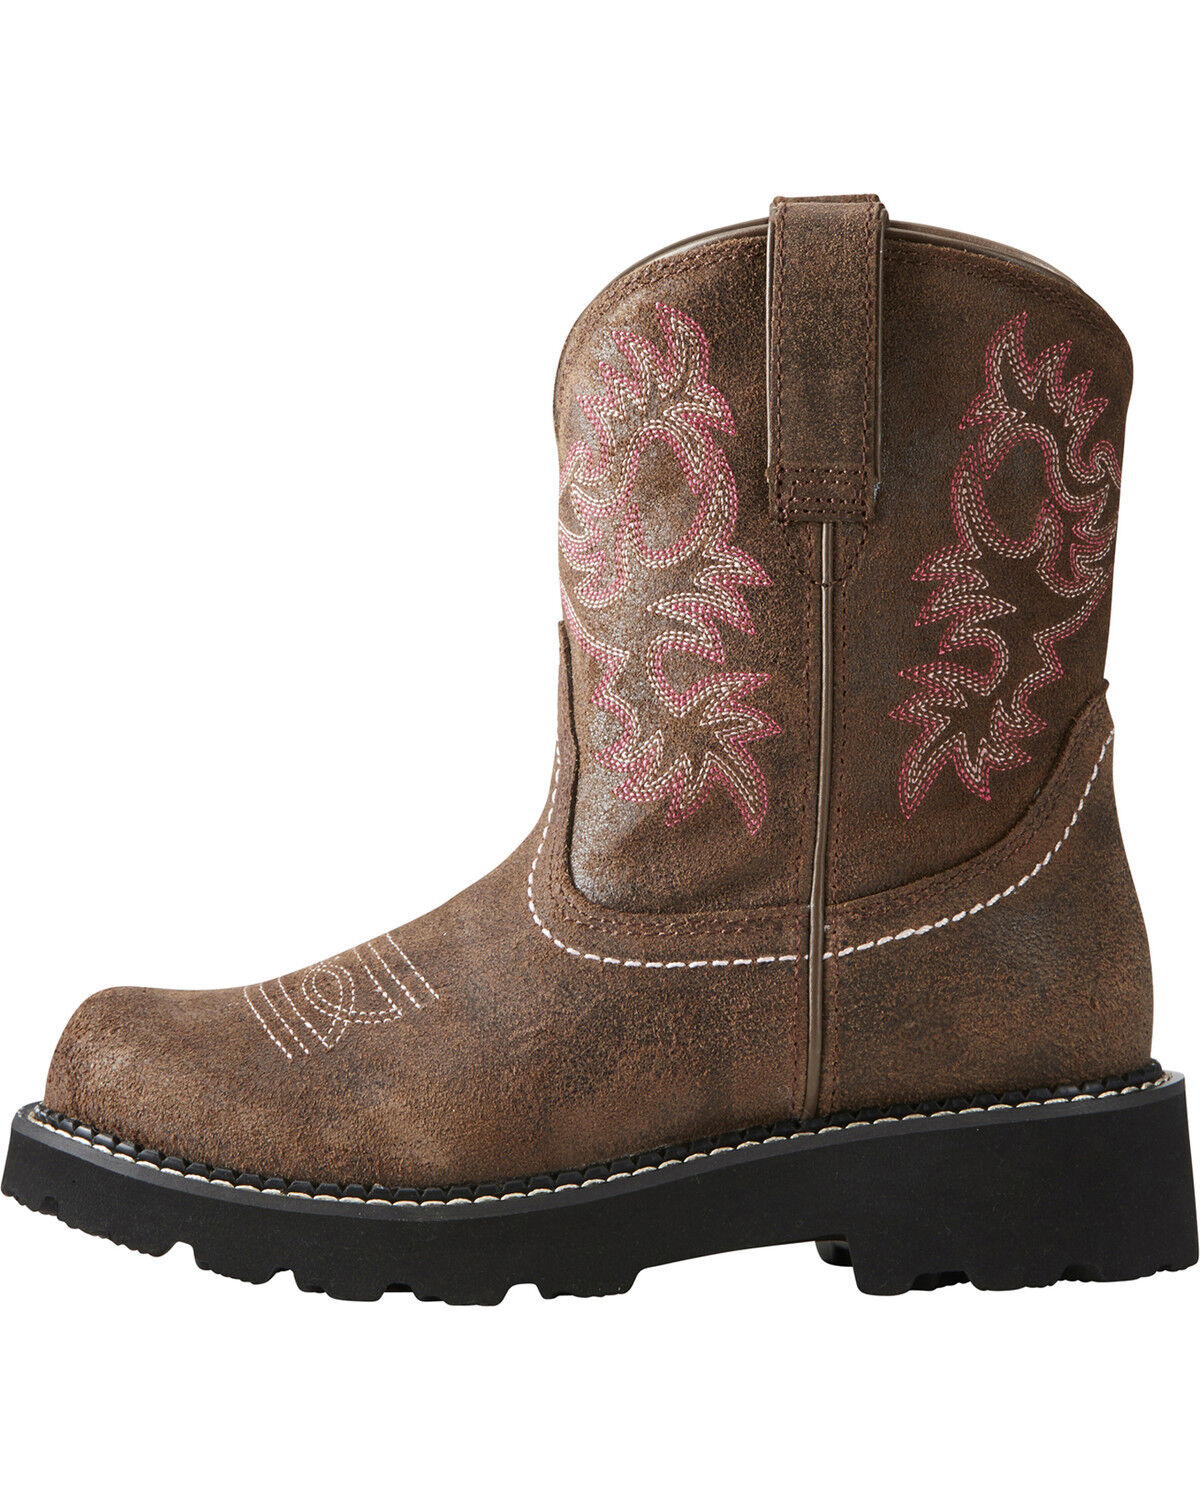 ariat fatbaby lace up boots